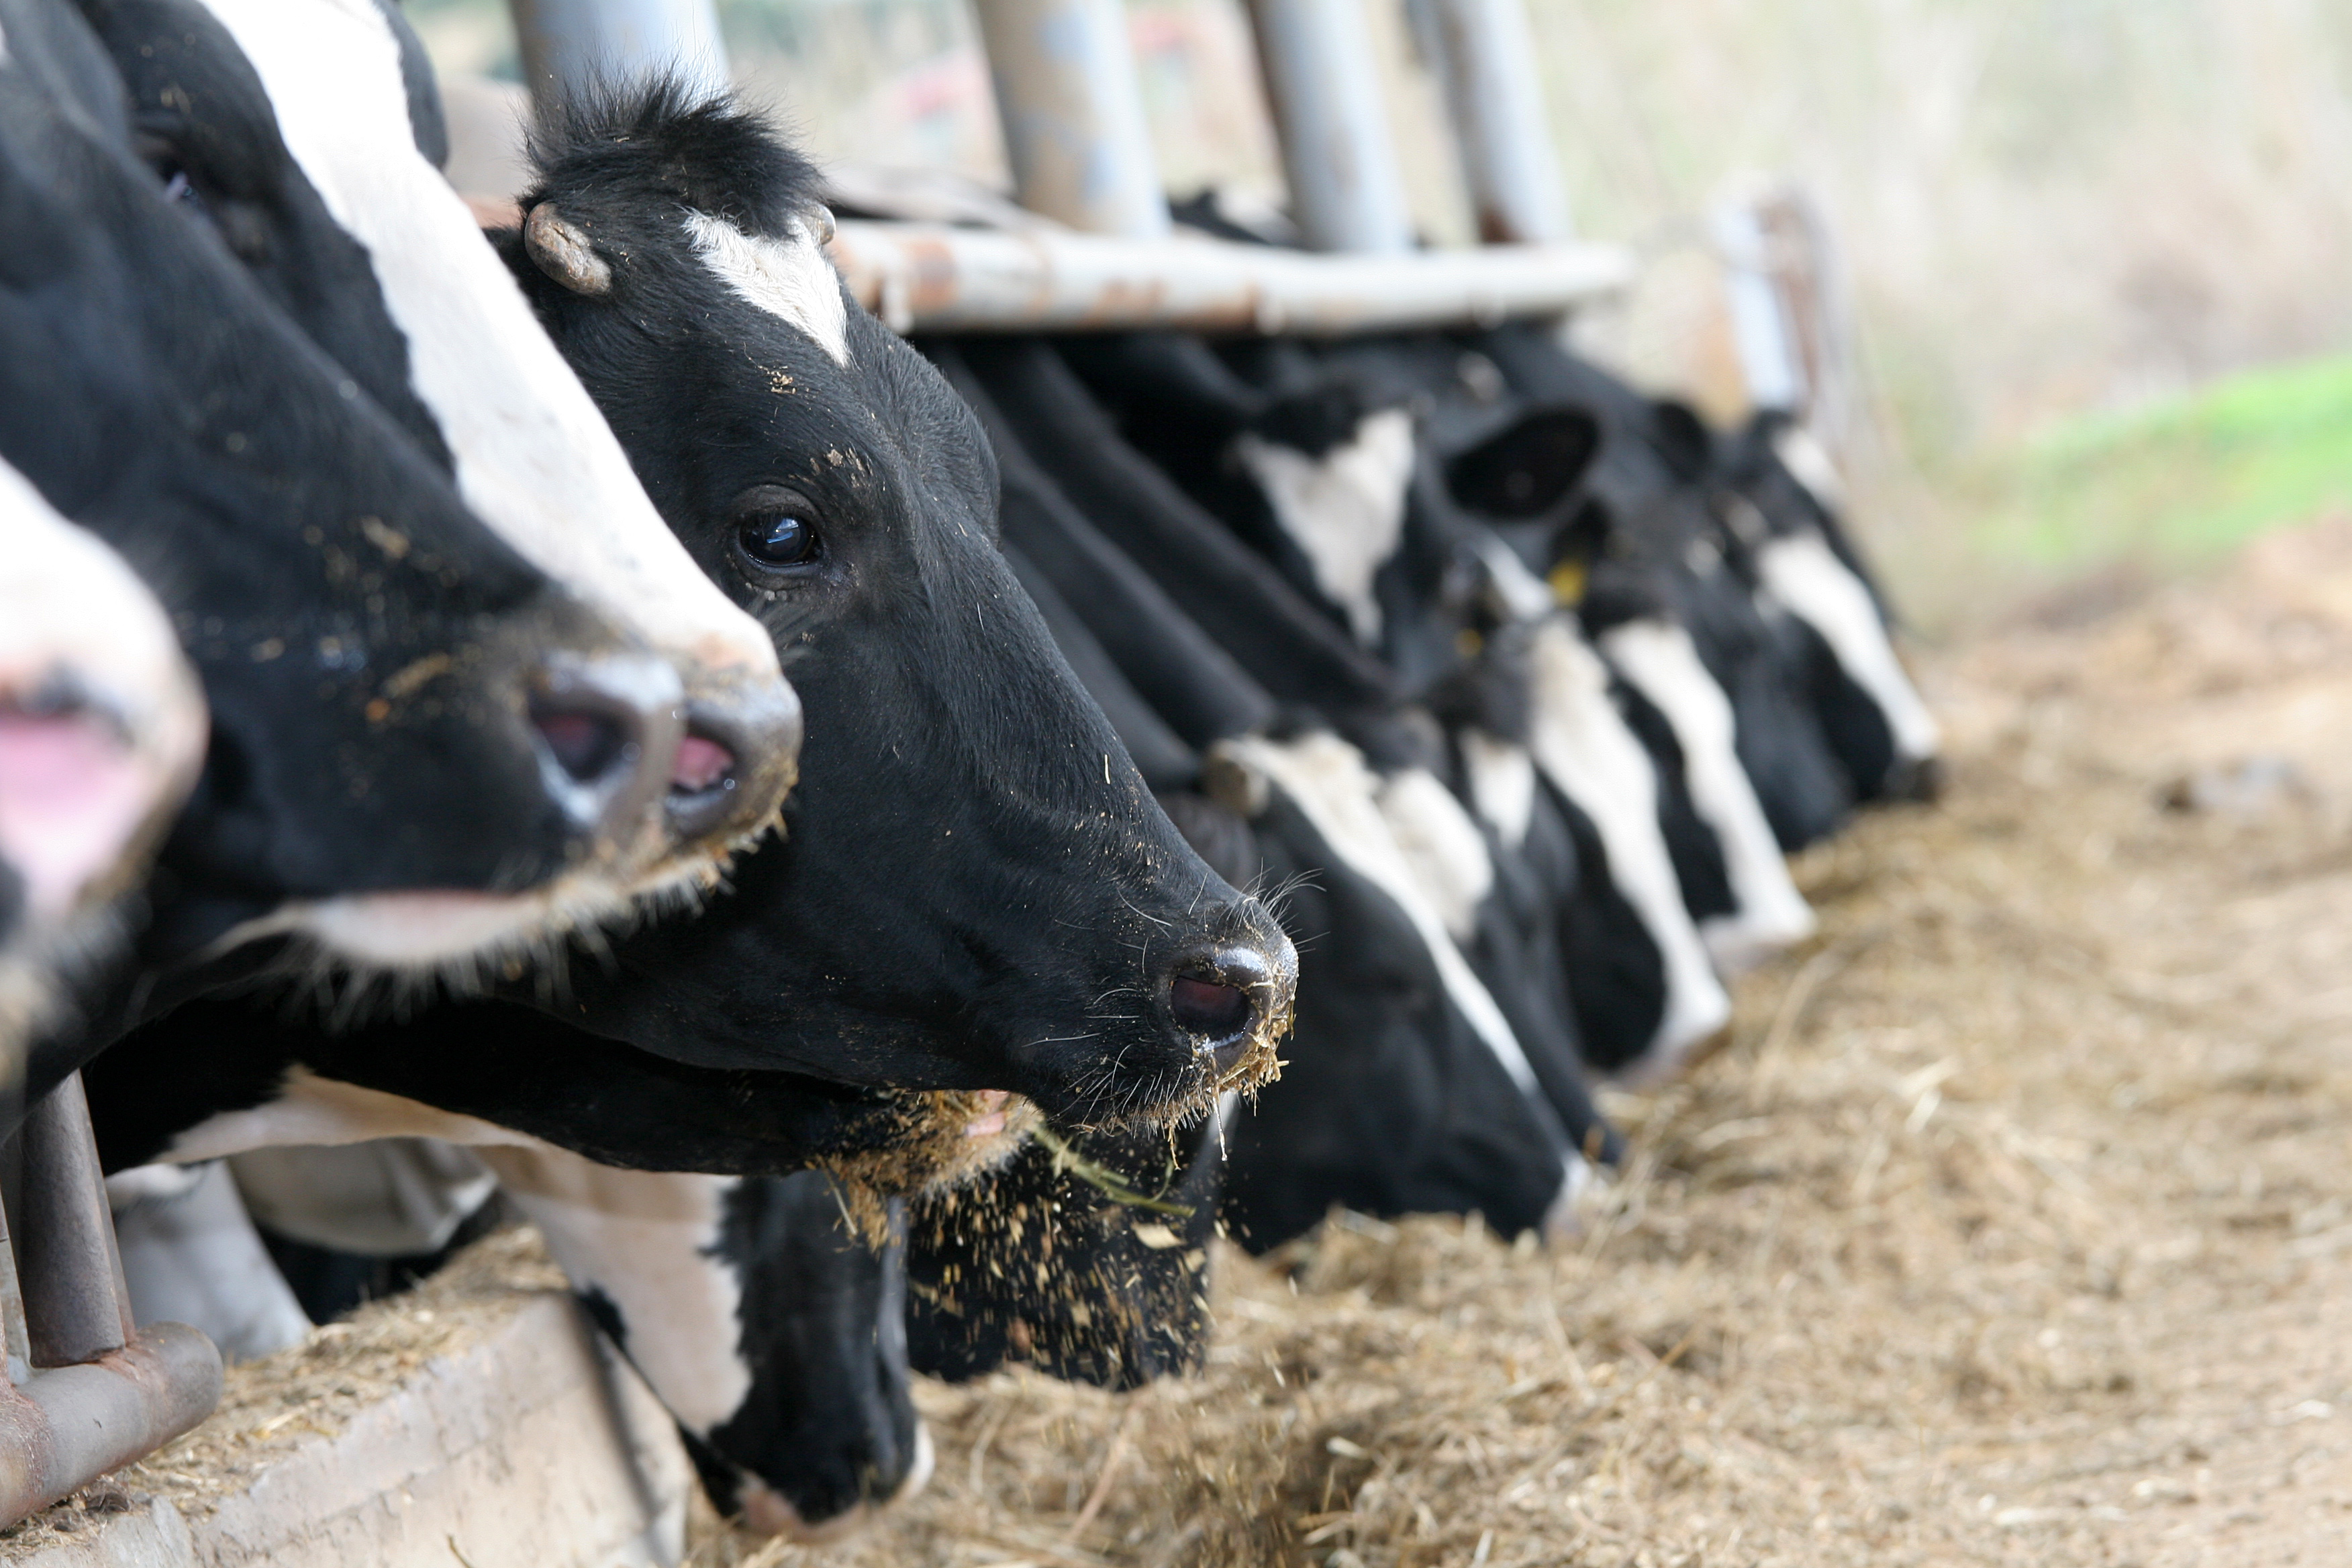 NOA – A Management Information System for the National Dairy and Beef Herds